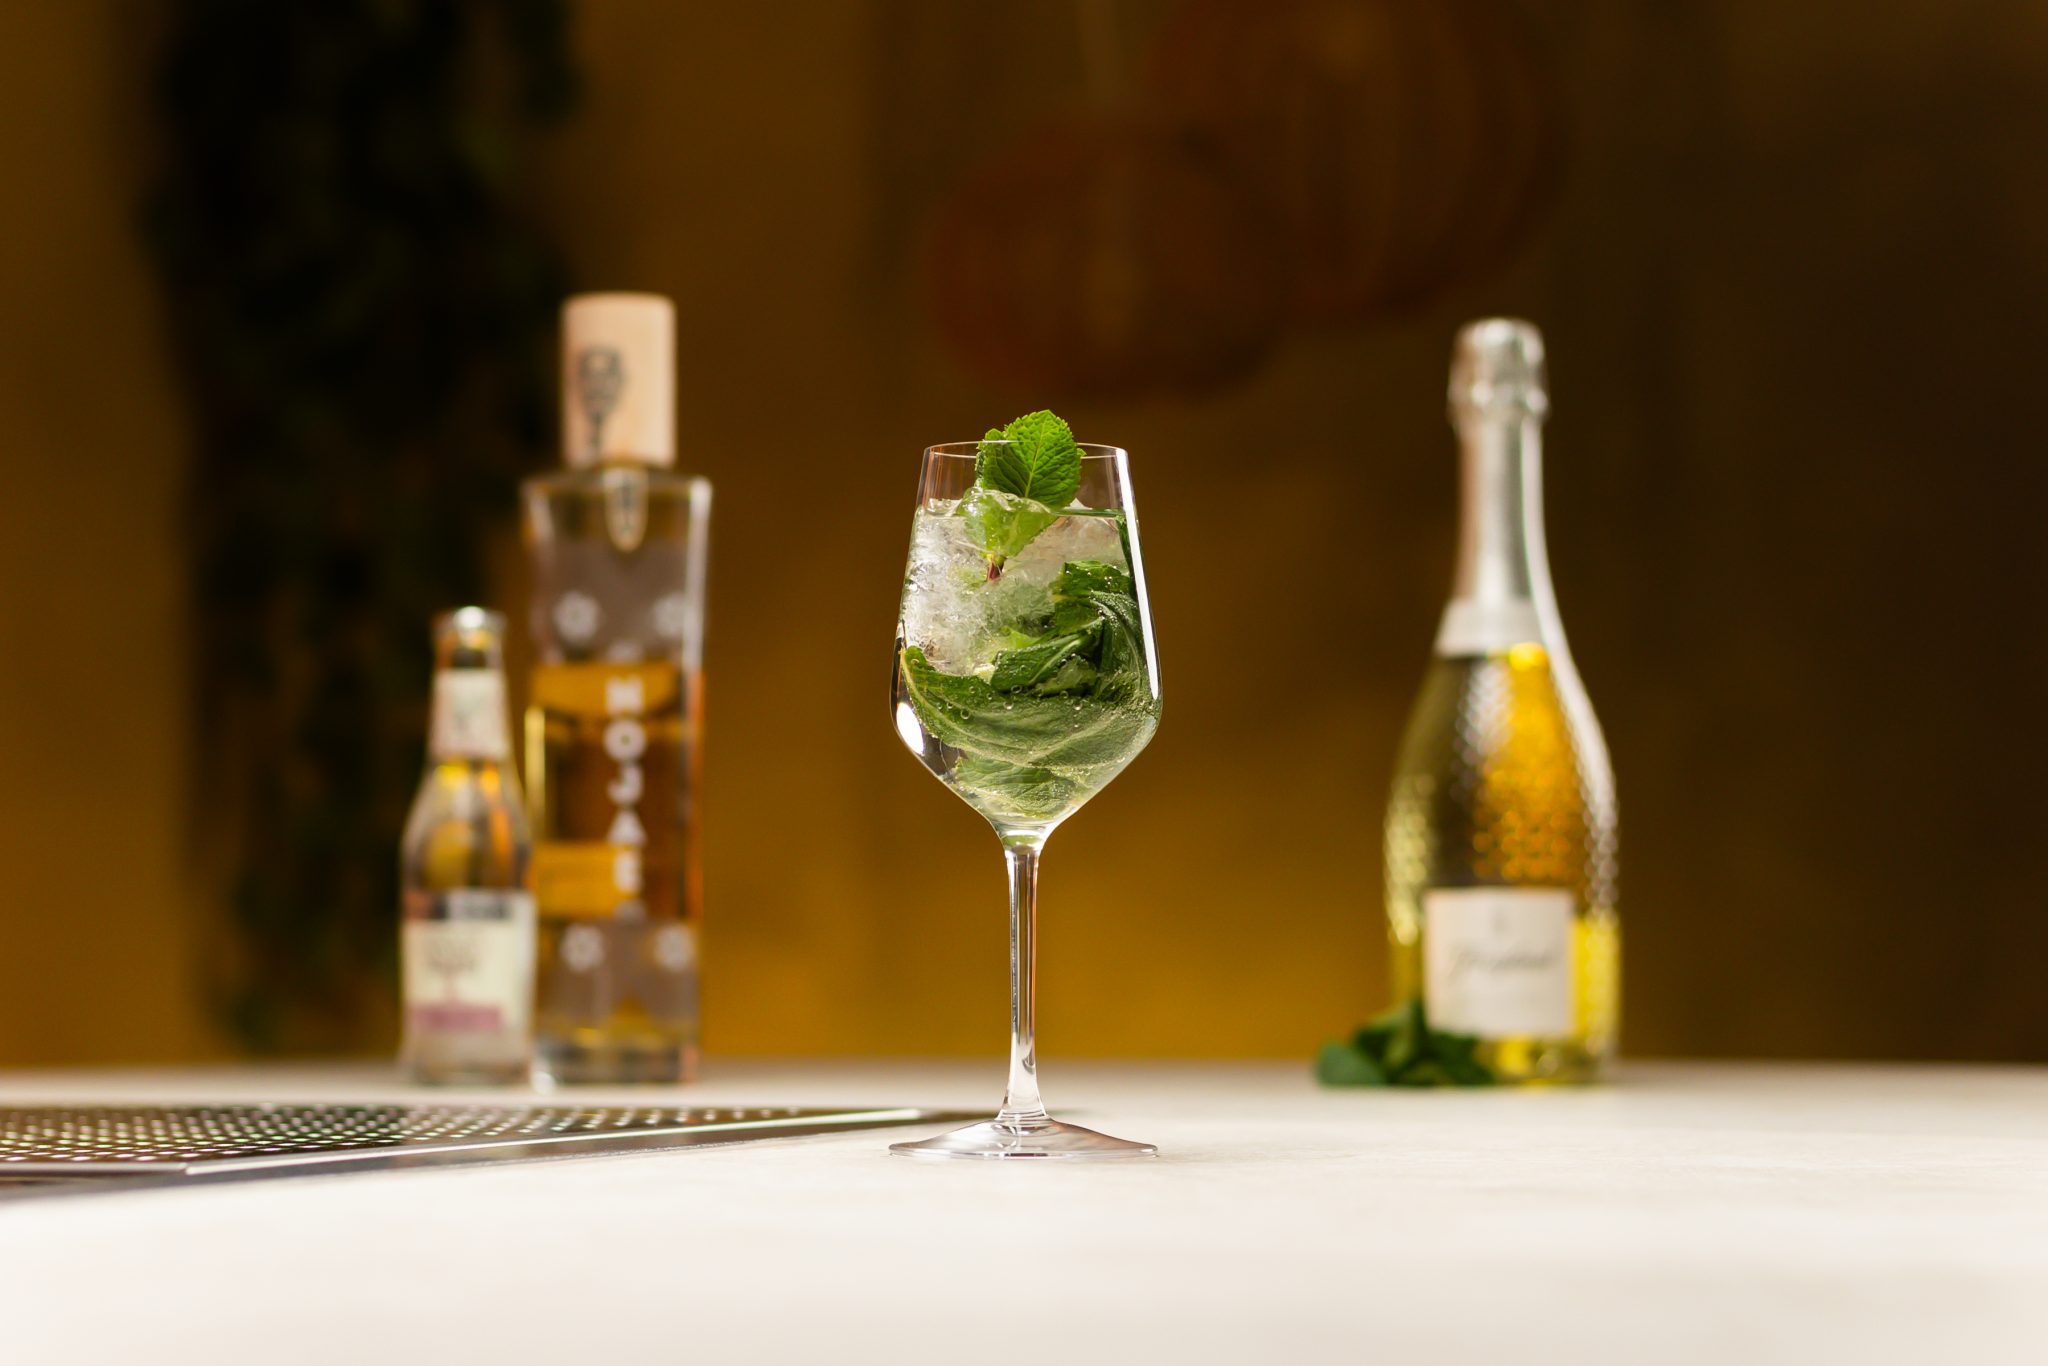 Saint Germain elderflower liqueur, Prosecco, soda water and mint leaves laid out on a white bar table